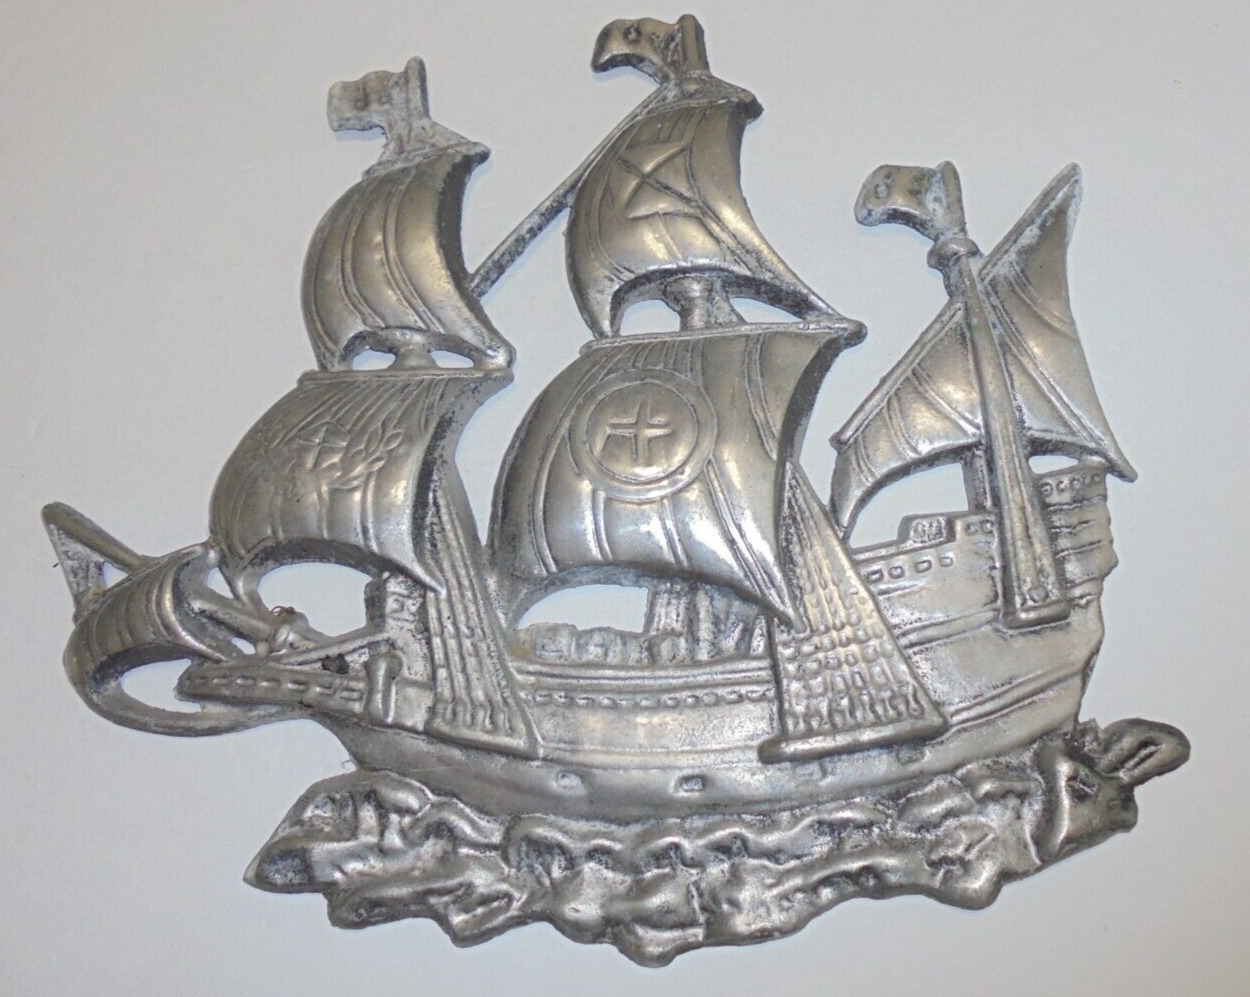 Vintage Cast Metal Pirate Ship or Spanish Ship Wall Hanging